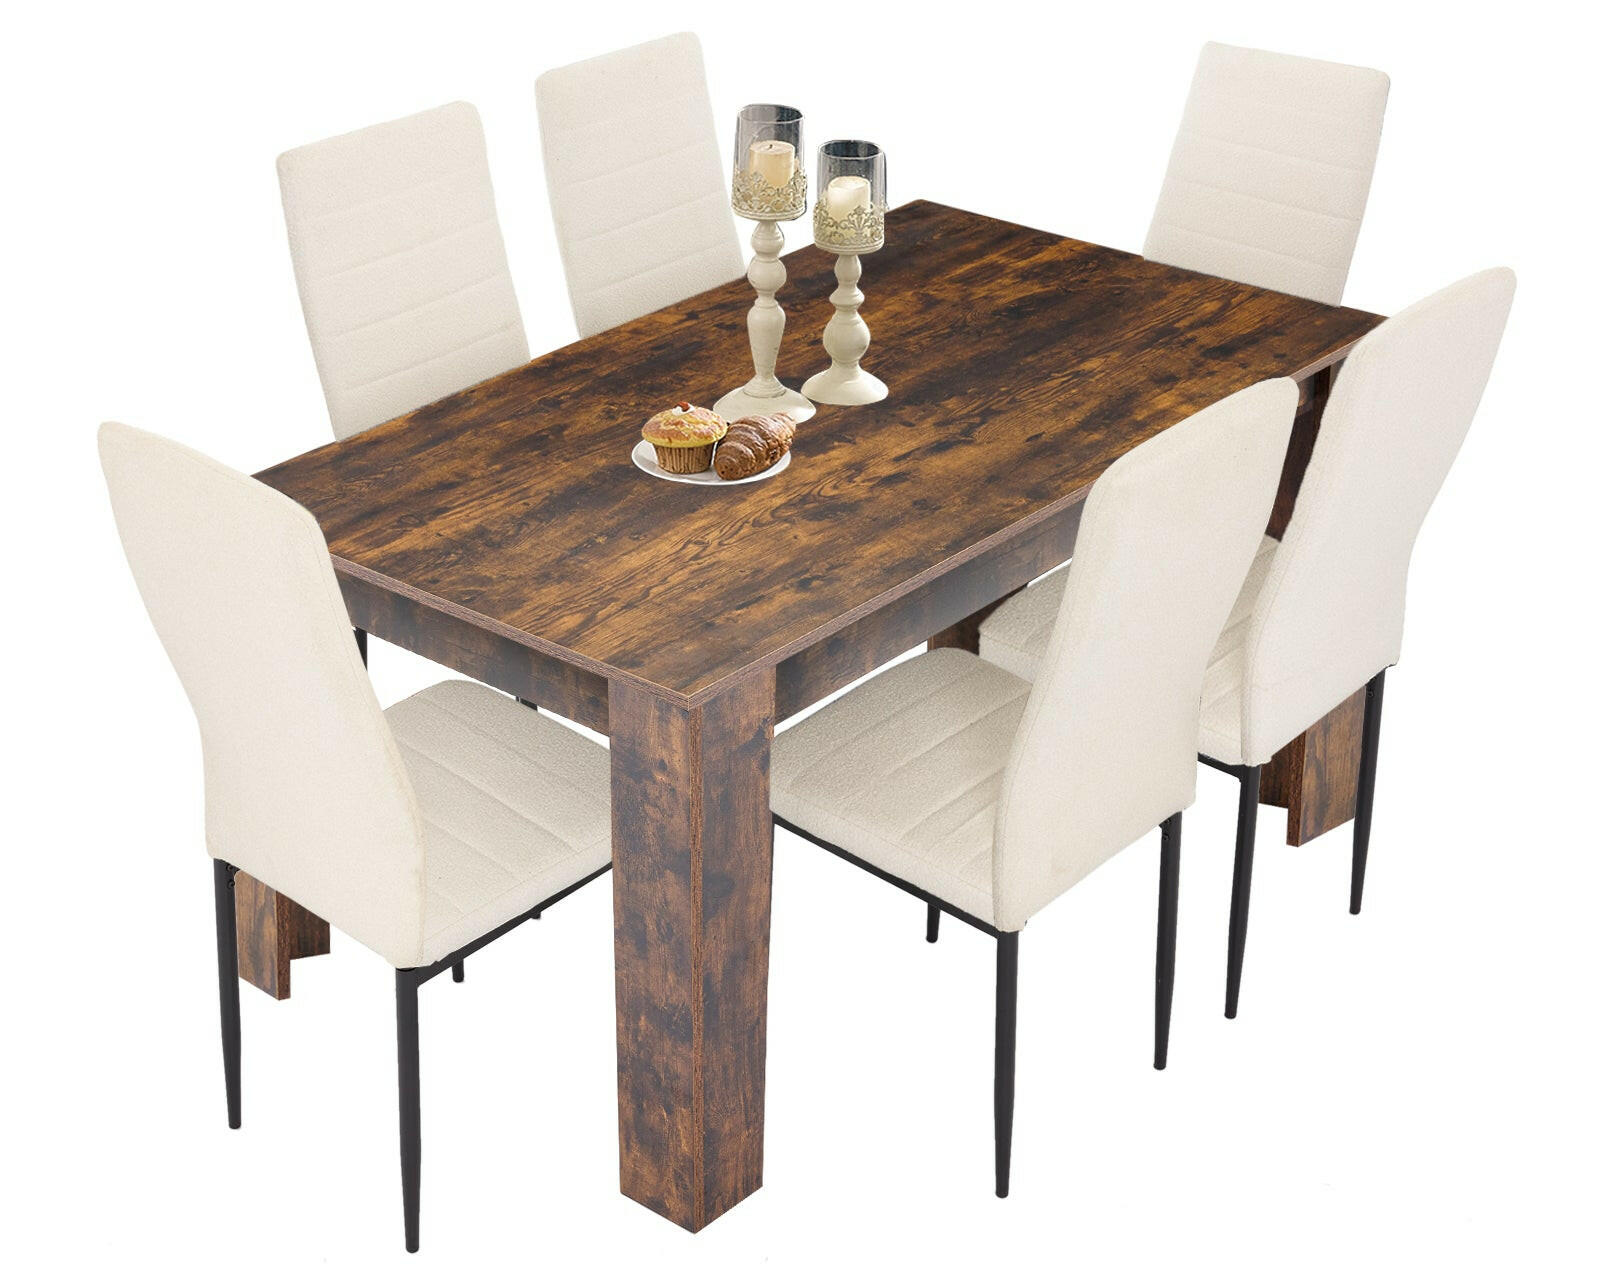 6 chairs for dining table